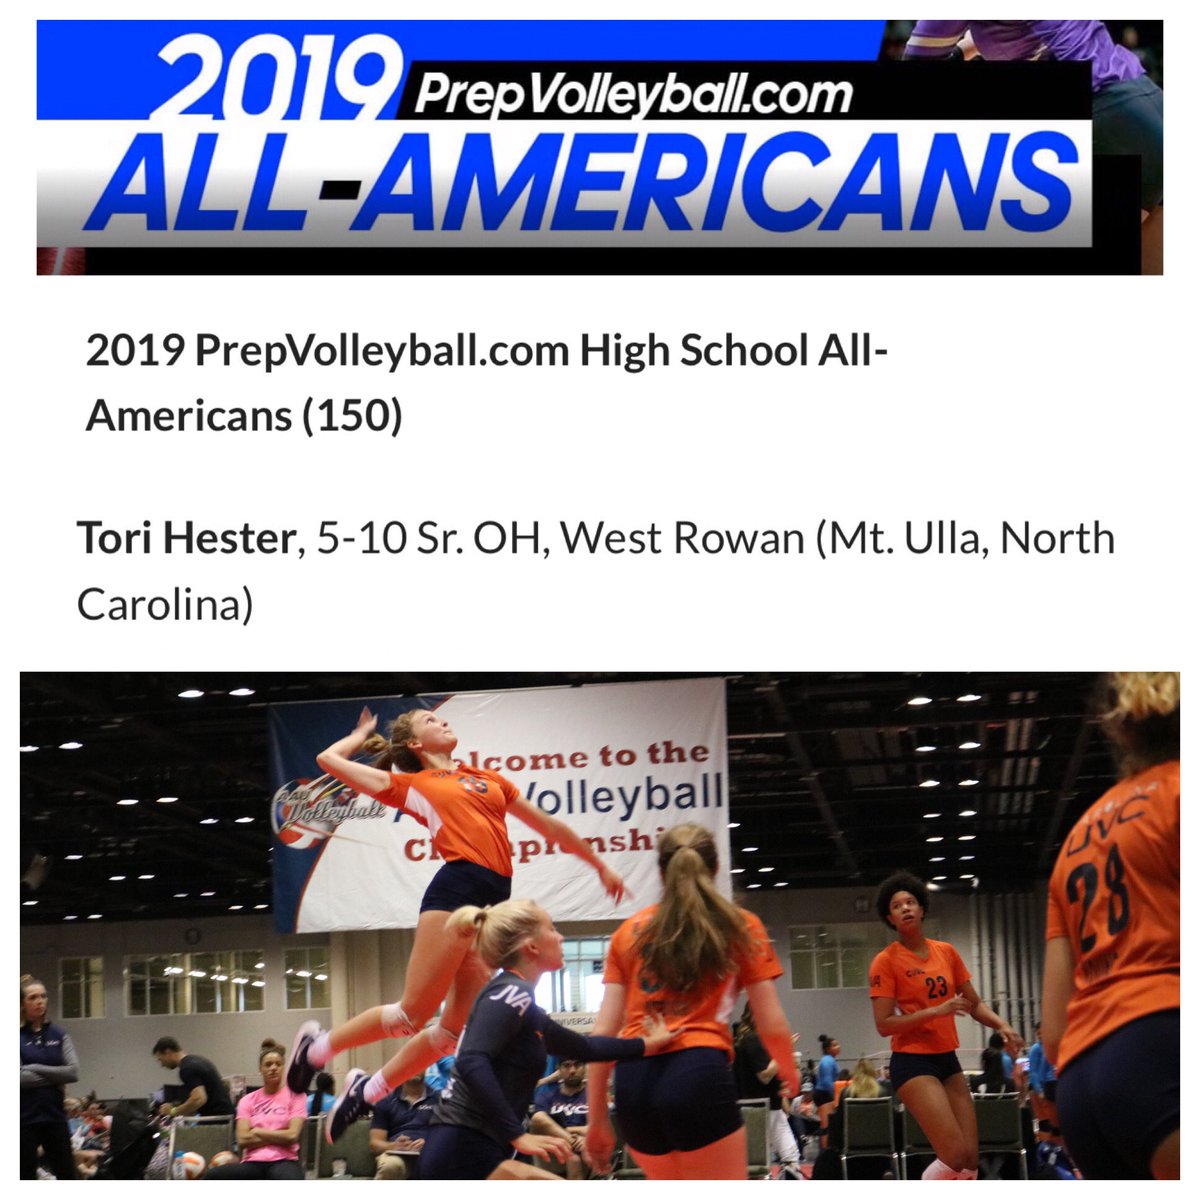 Congratulations @hester_tori!! @PrepVolleyball recognized some great volleyball players throughout the country!! @WRHS_VBALL @CarolinaUVC she couldn’t have done it without you pushing her these last few years! #hardworkpaysoff #futureTroyTrojan